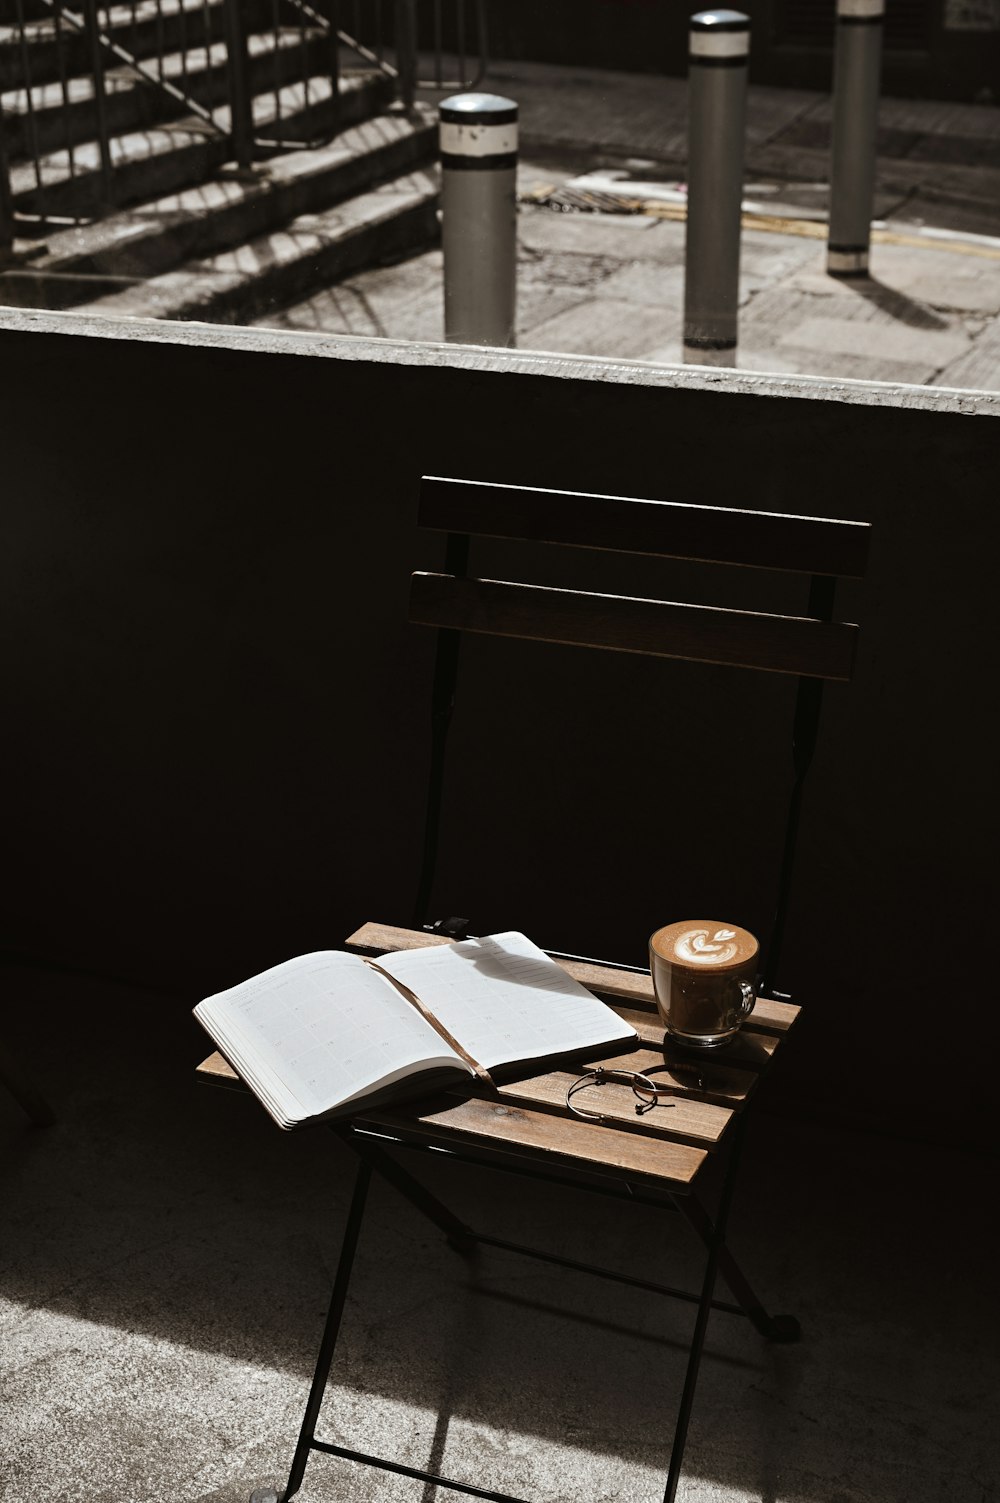 white book on brown wooden table